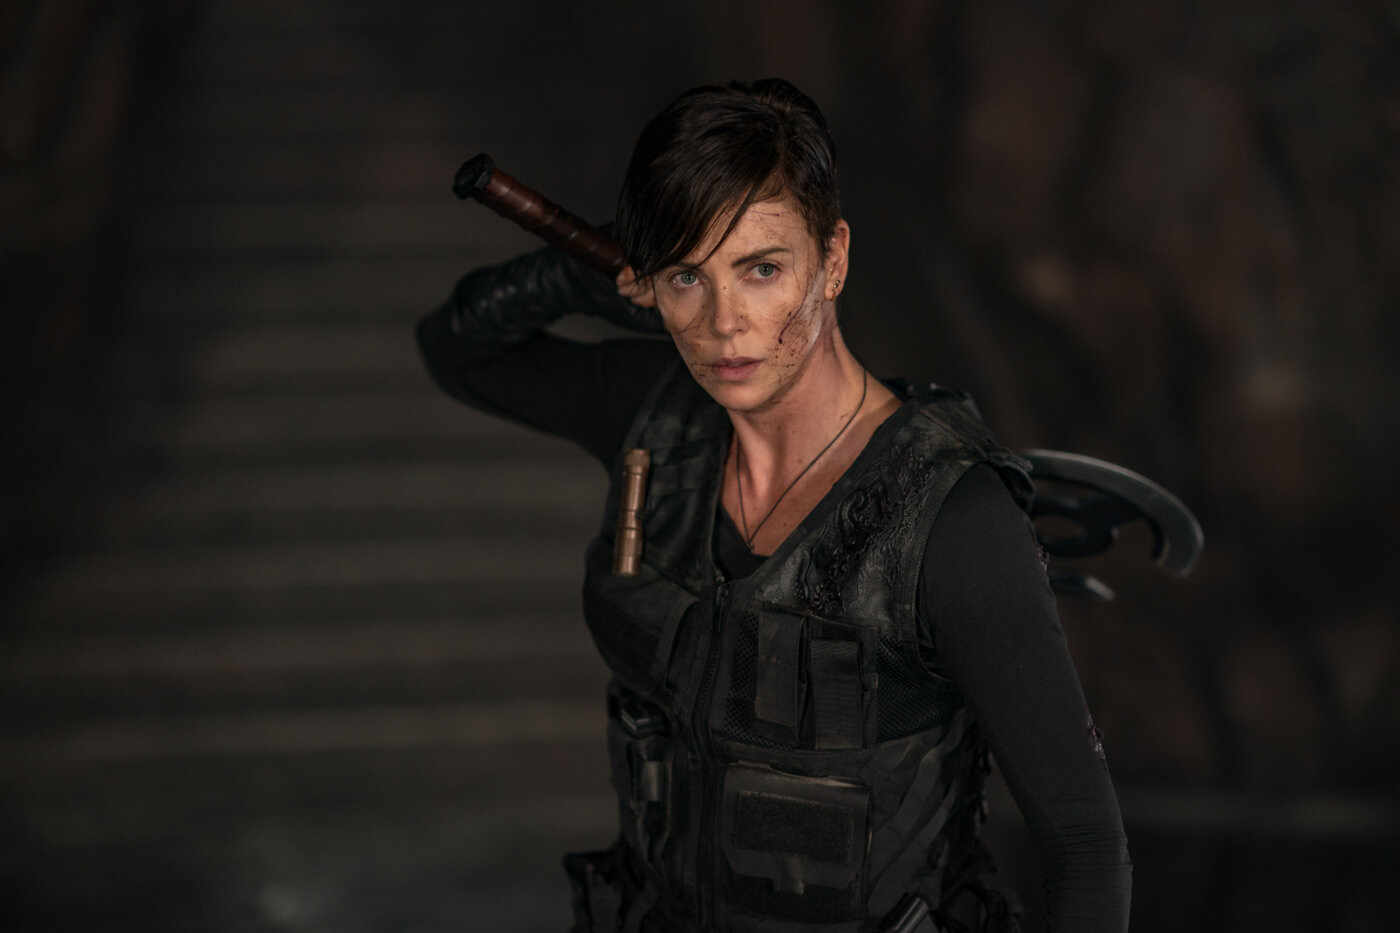 Is Charlize Theron Kickstarting a New Action Franchise? ‘The Old Guard’ Review